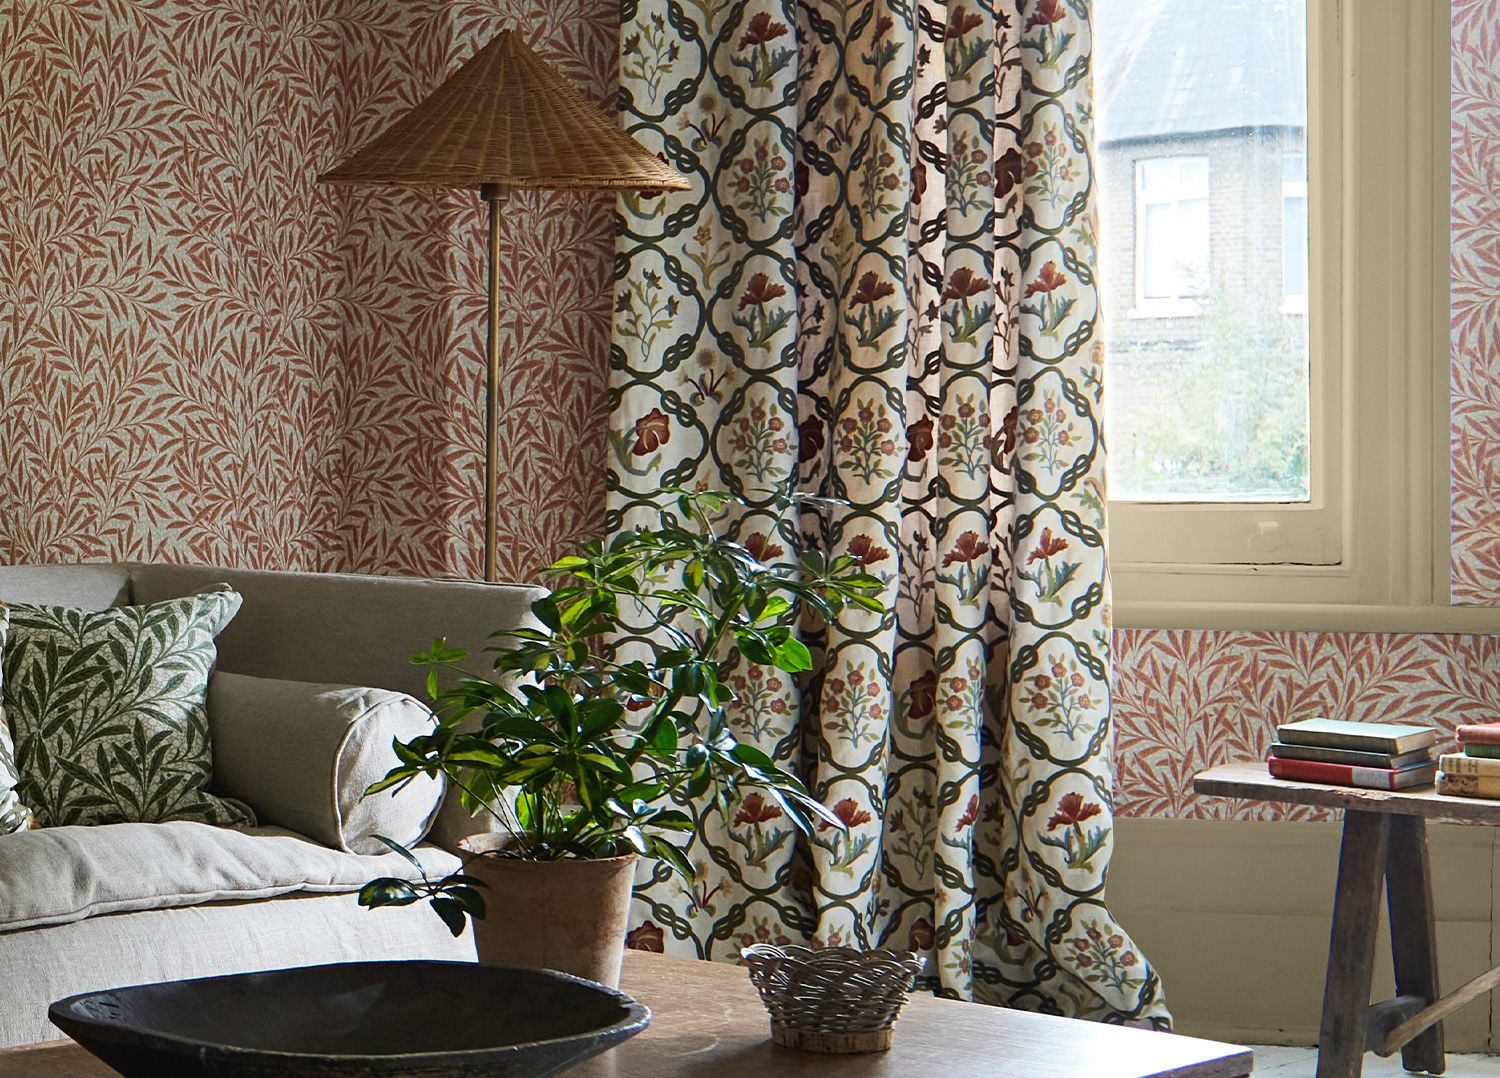 Image of floral curtains